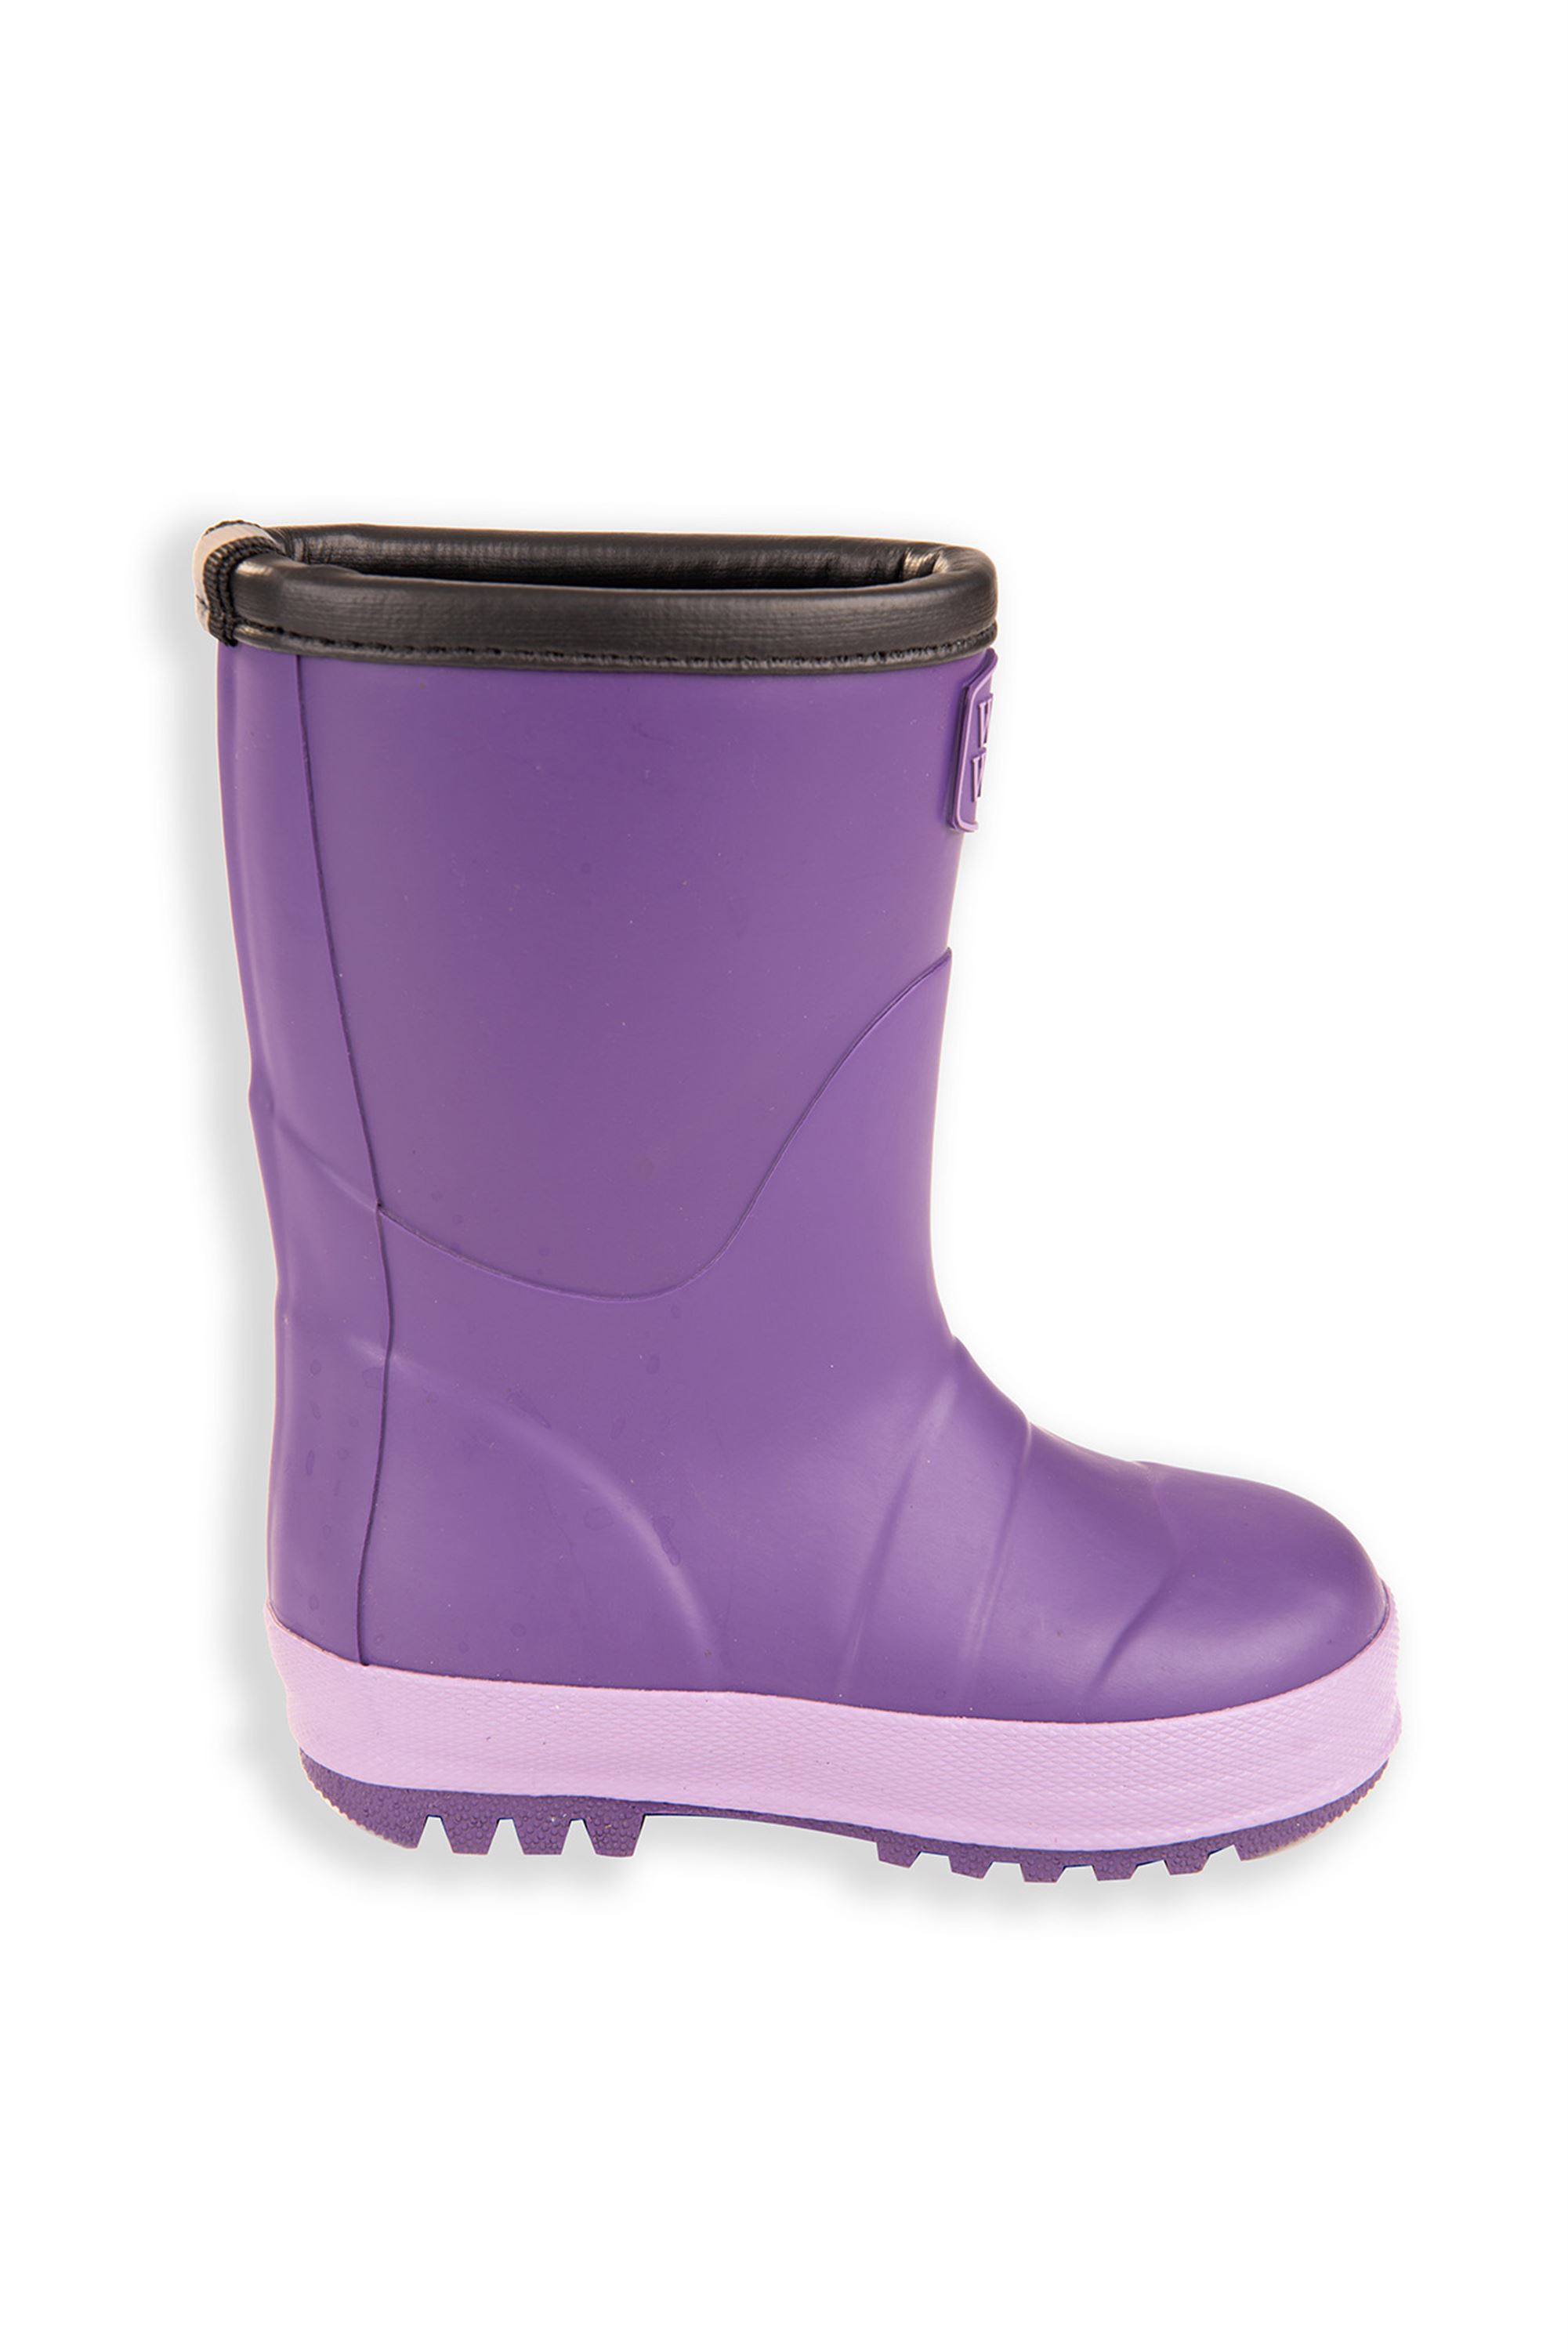 Purple Toddler Warm Wellies | The Warm Welly Company